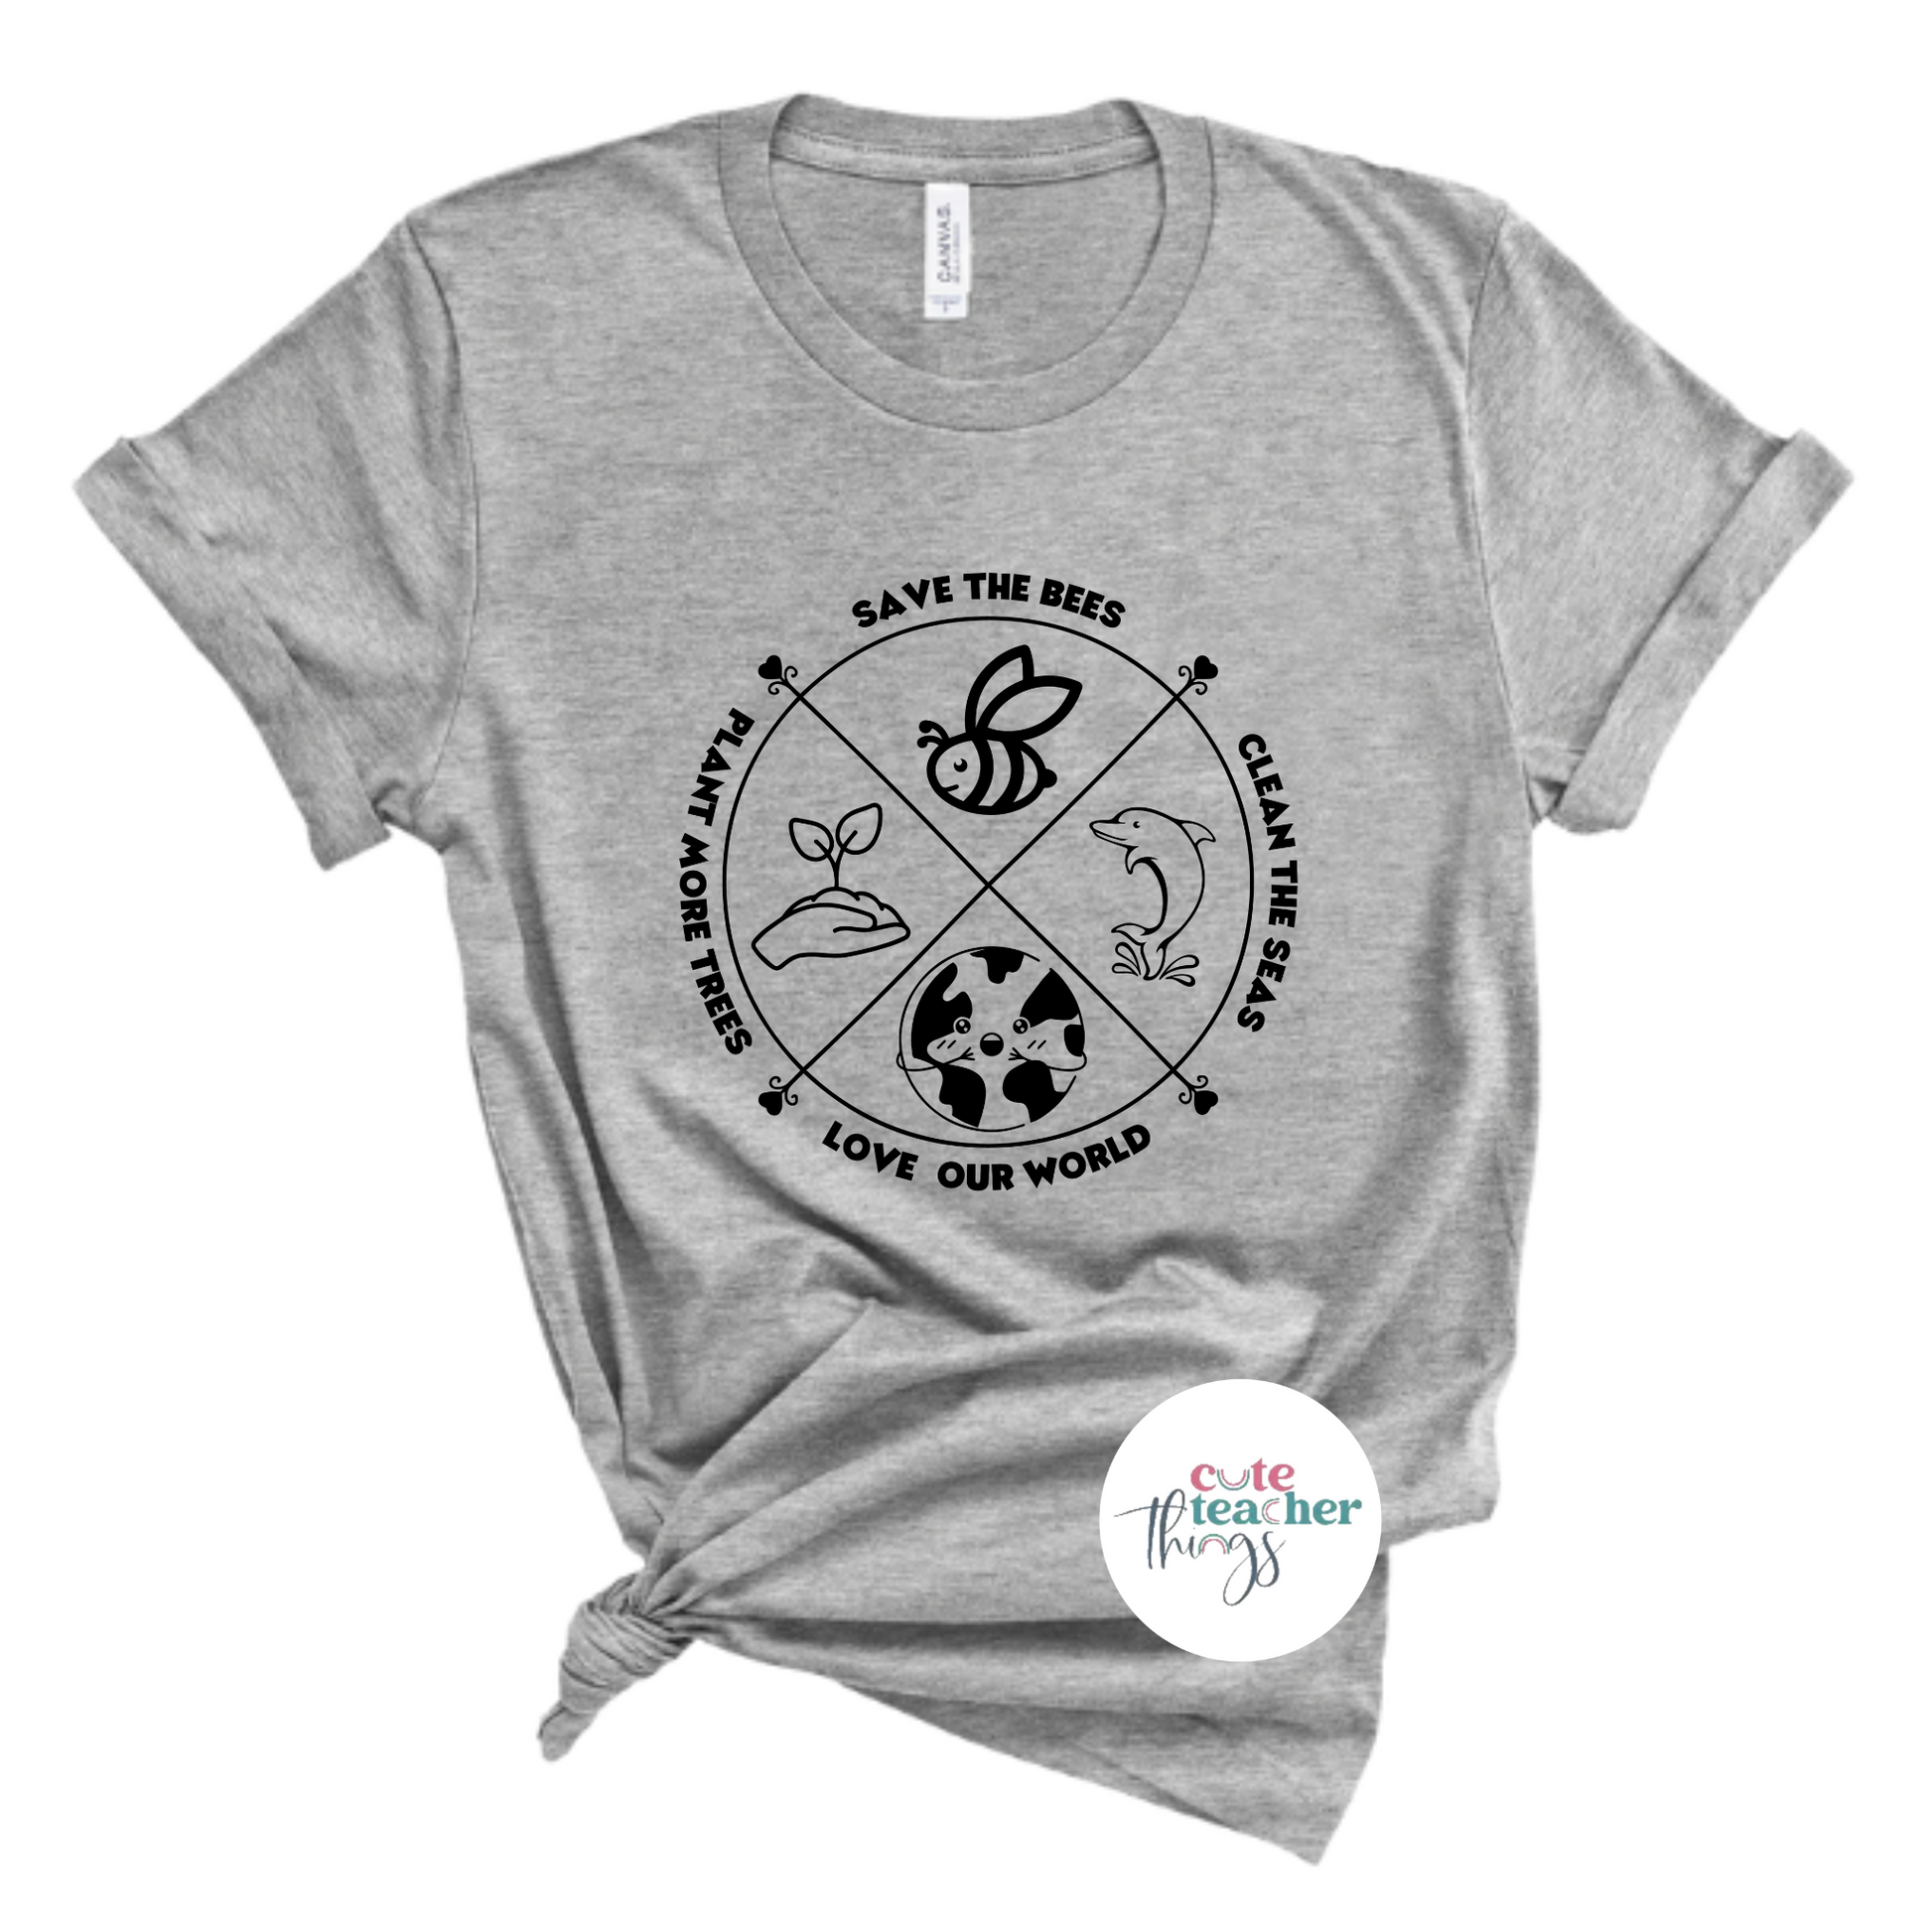 love our world, save the bees, environment t-shirt